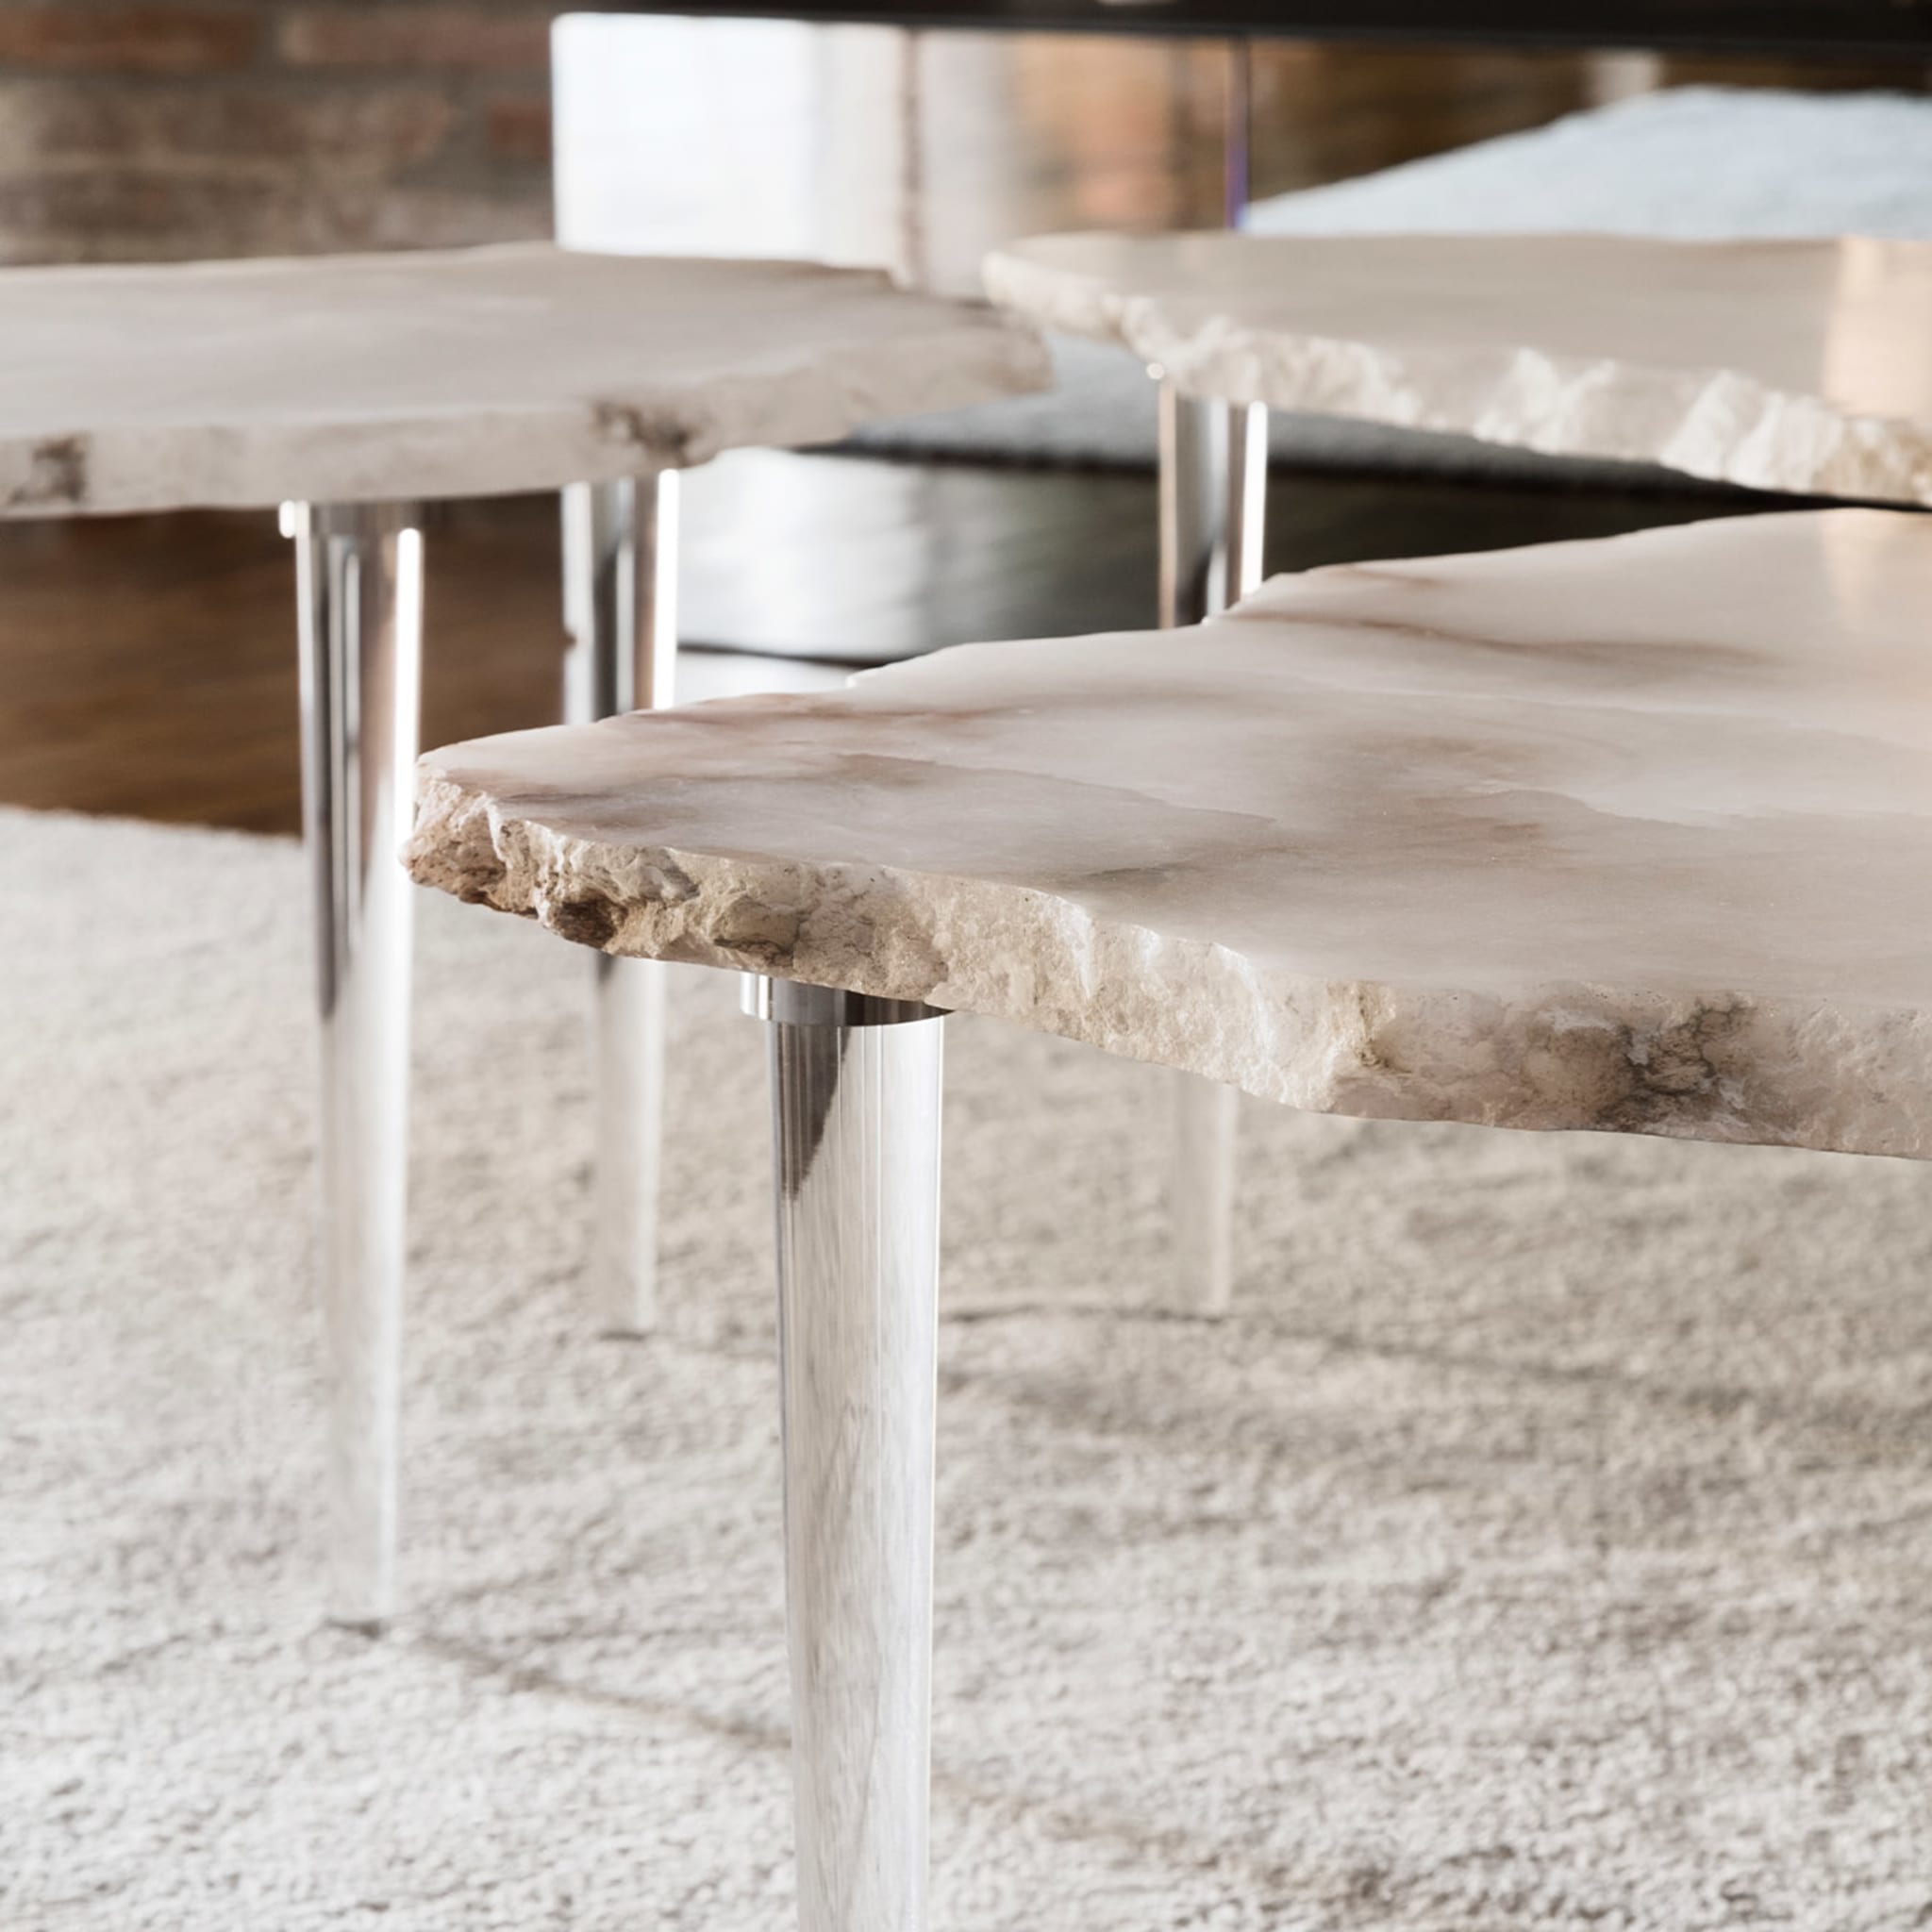 A-68 set of 3 Coffee Tables - Alternative view 2